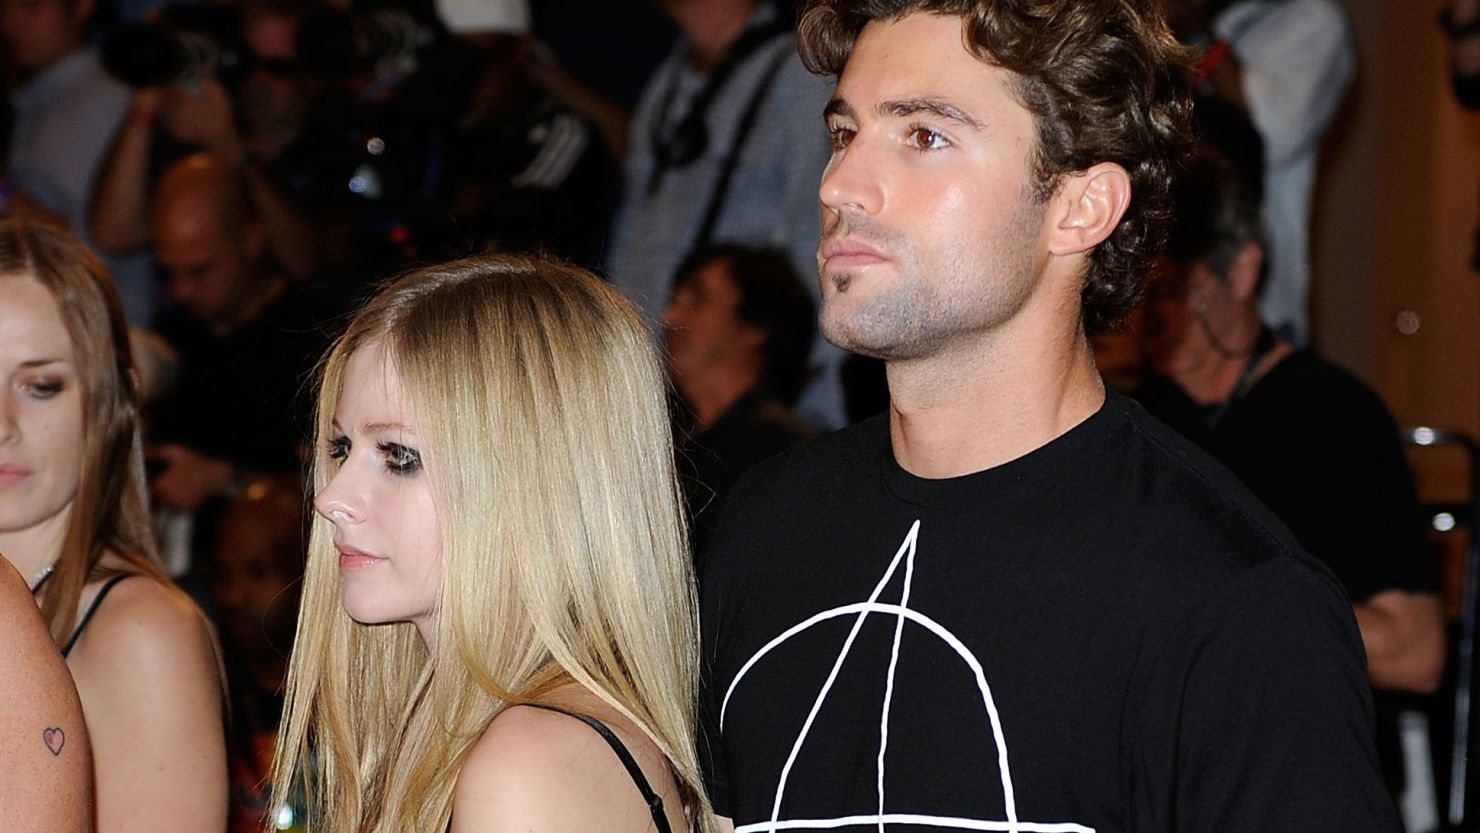 "It really upsets me to read all the FALSE!! stories," Brody Jenner wrote about Avril Lavigne.